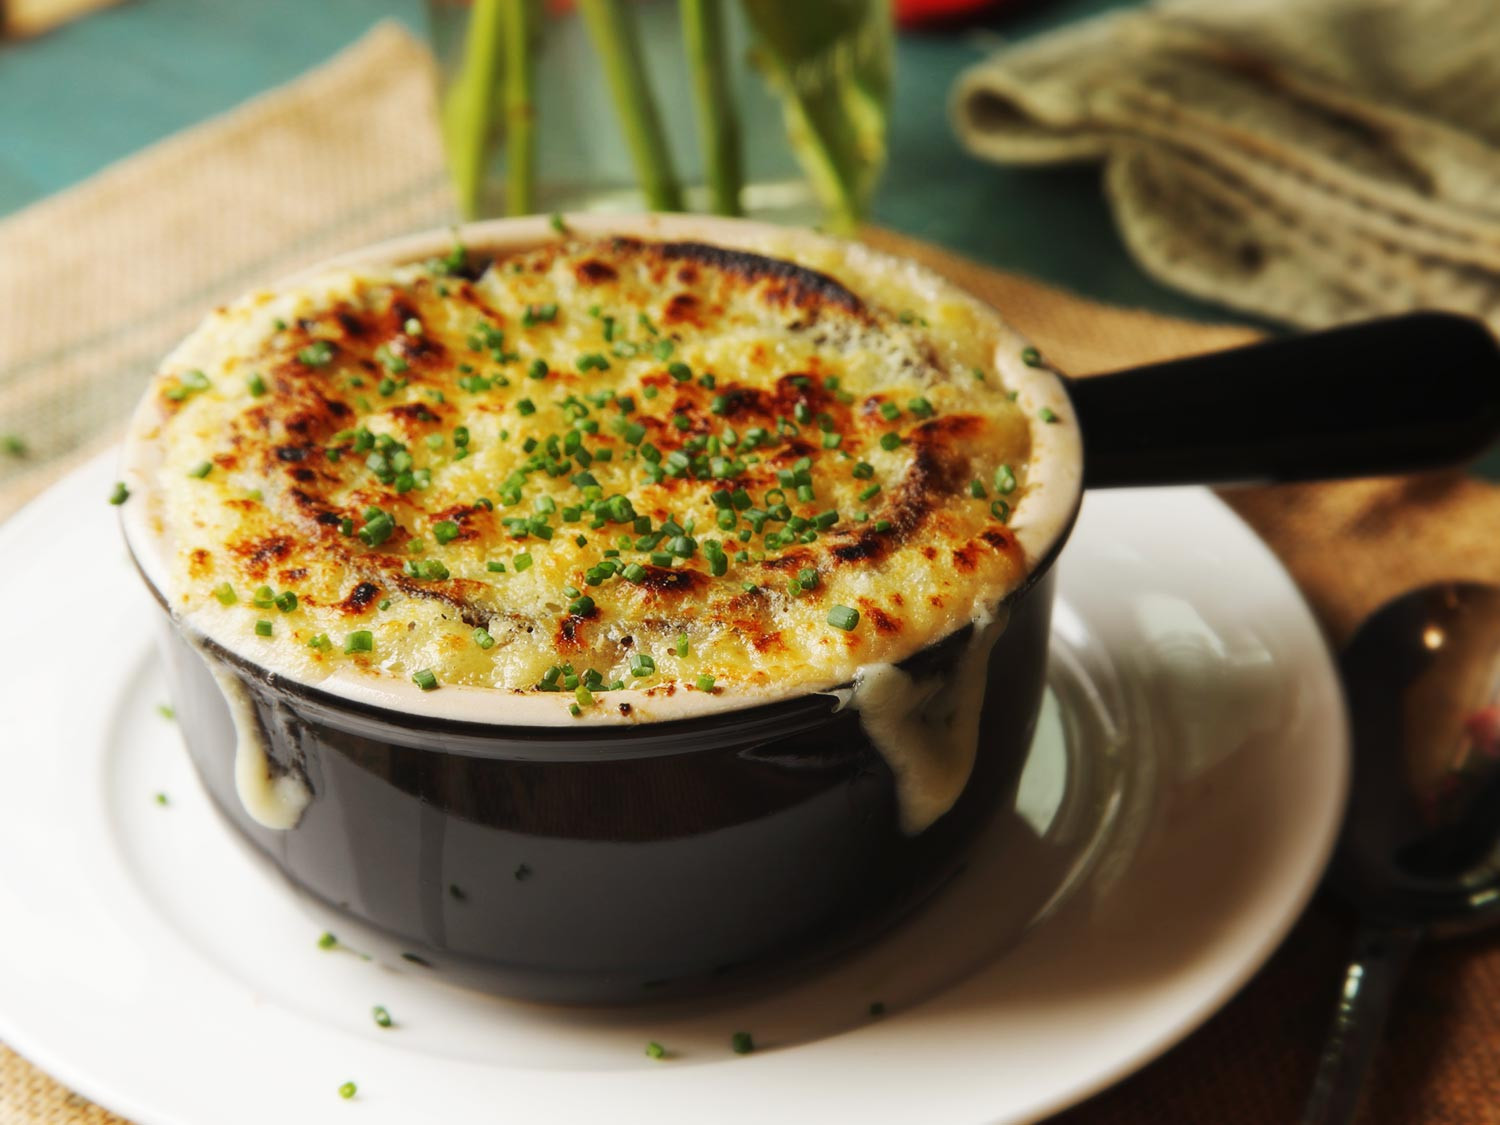 Recipe For French Onion Soup The Food Lab Use the Pressure Cooker for Quick